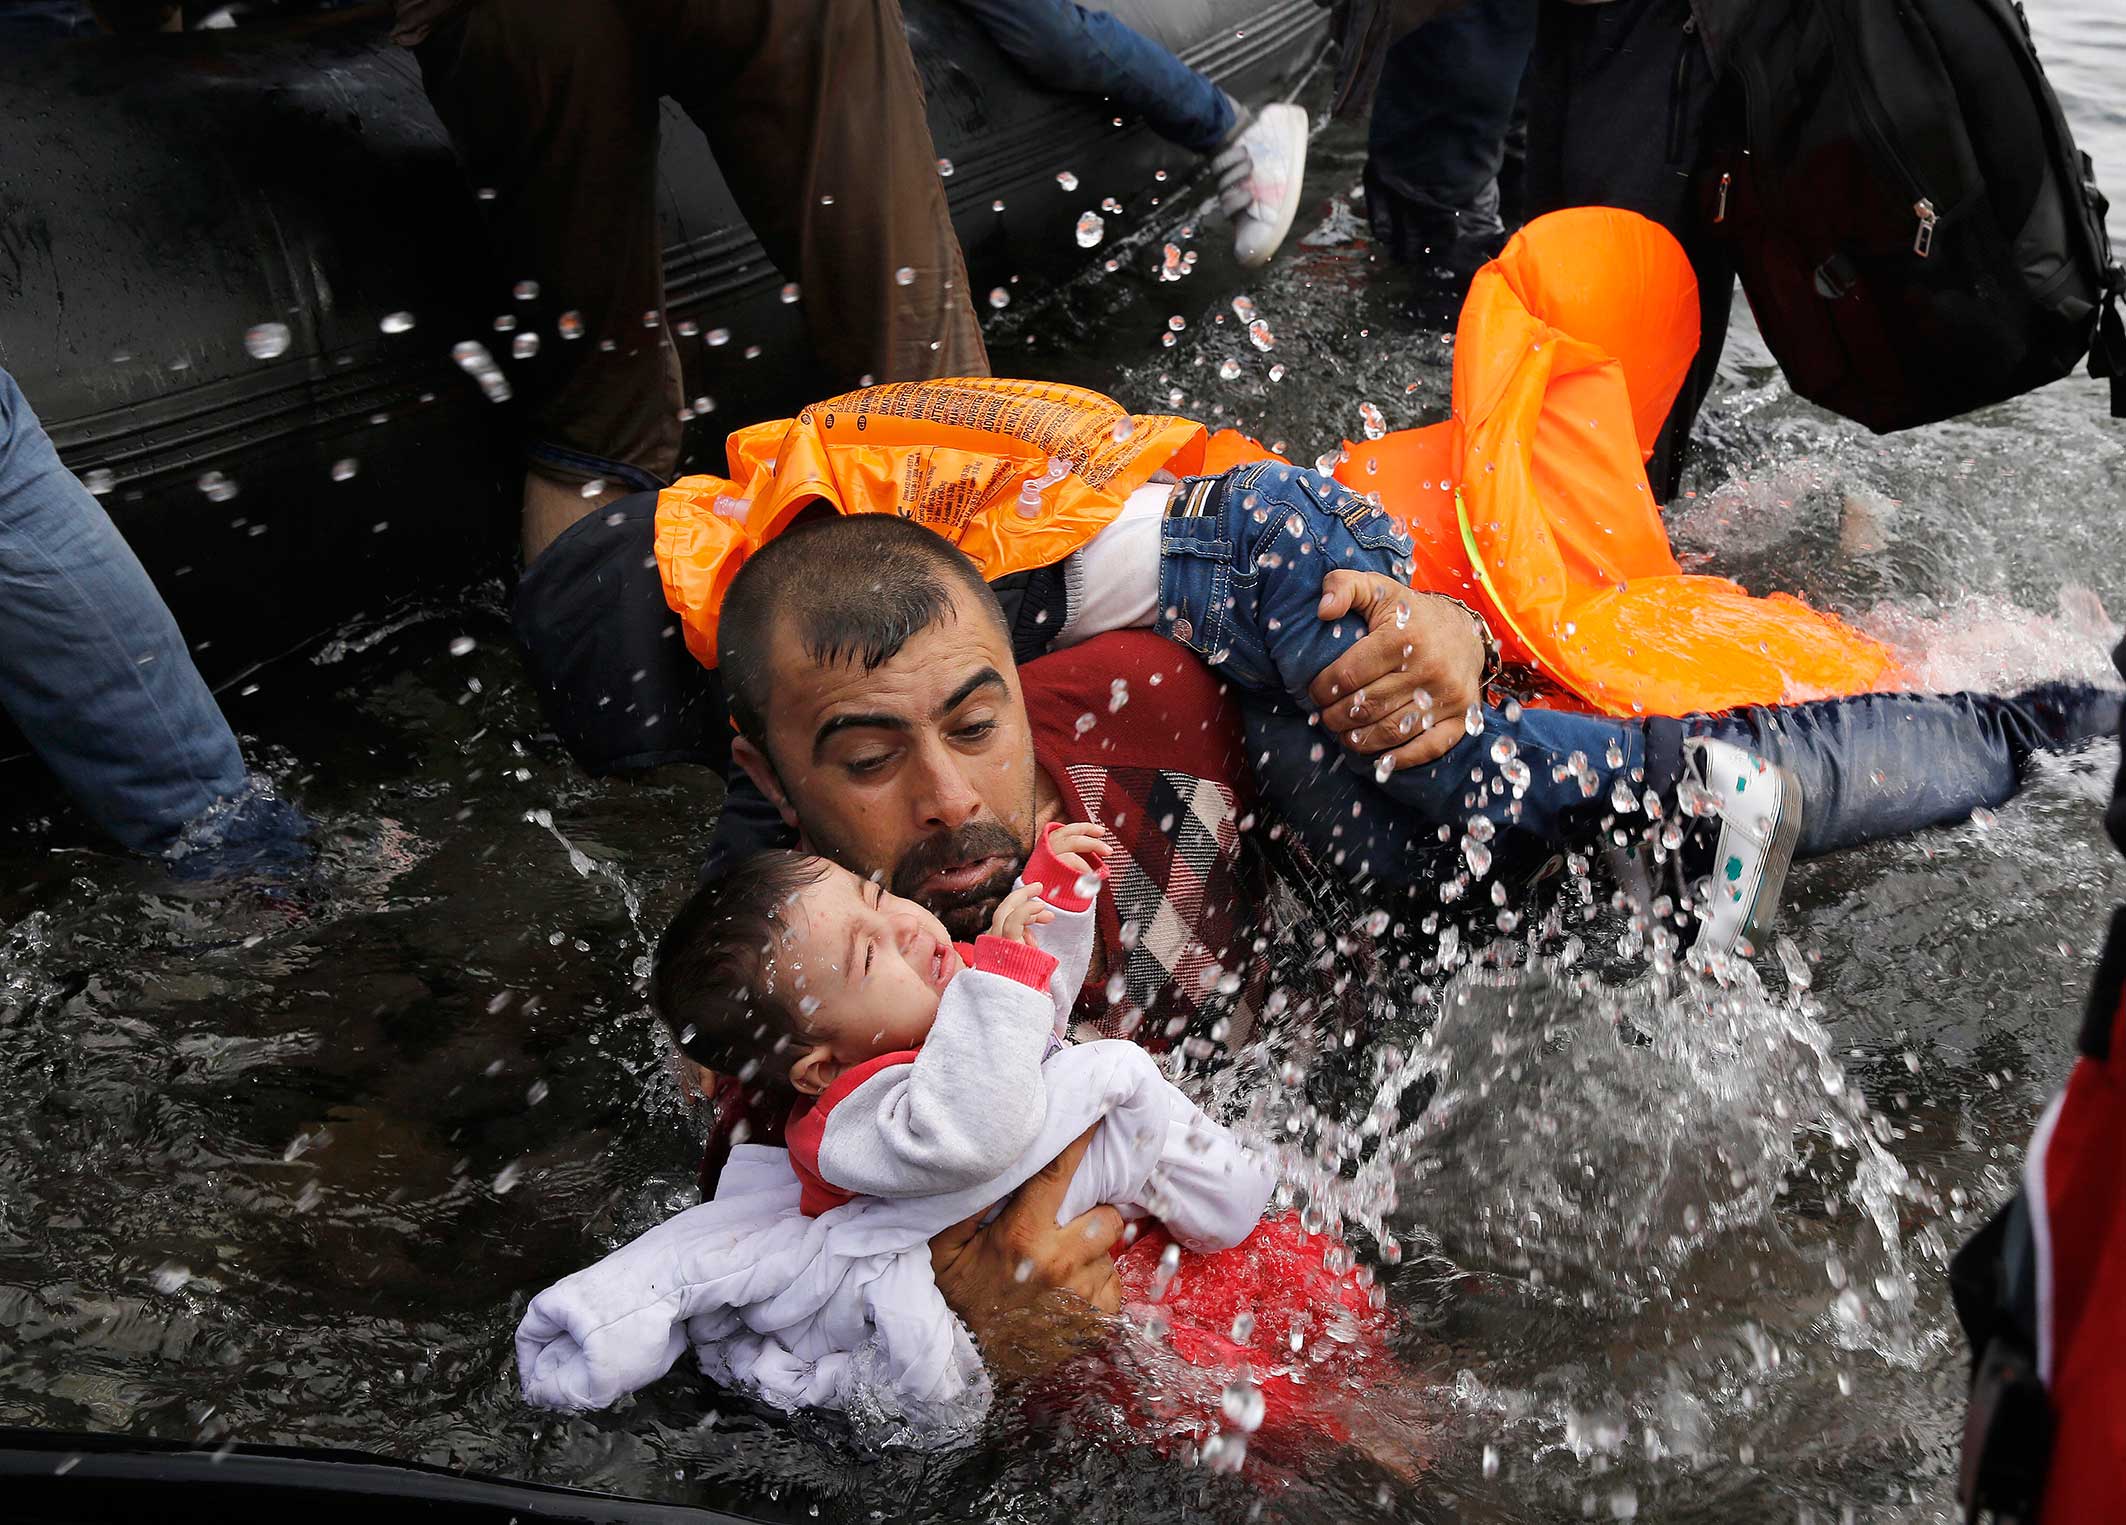 A Syrian with his two children struggling to disembark after crossing from Turkey. Island of Lesbos, Sept. 24, 2015.